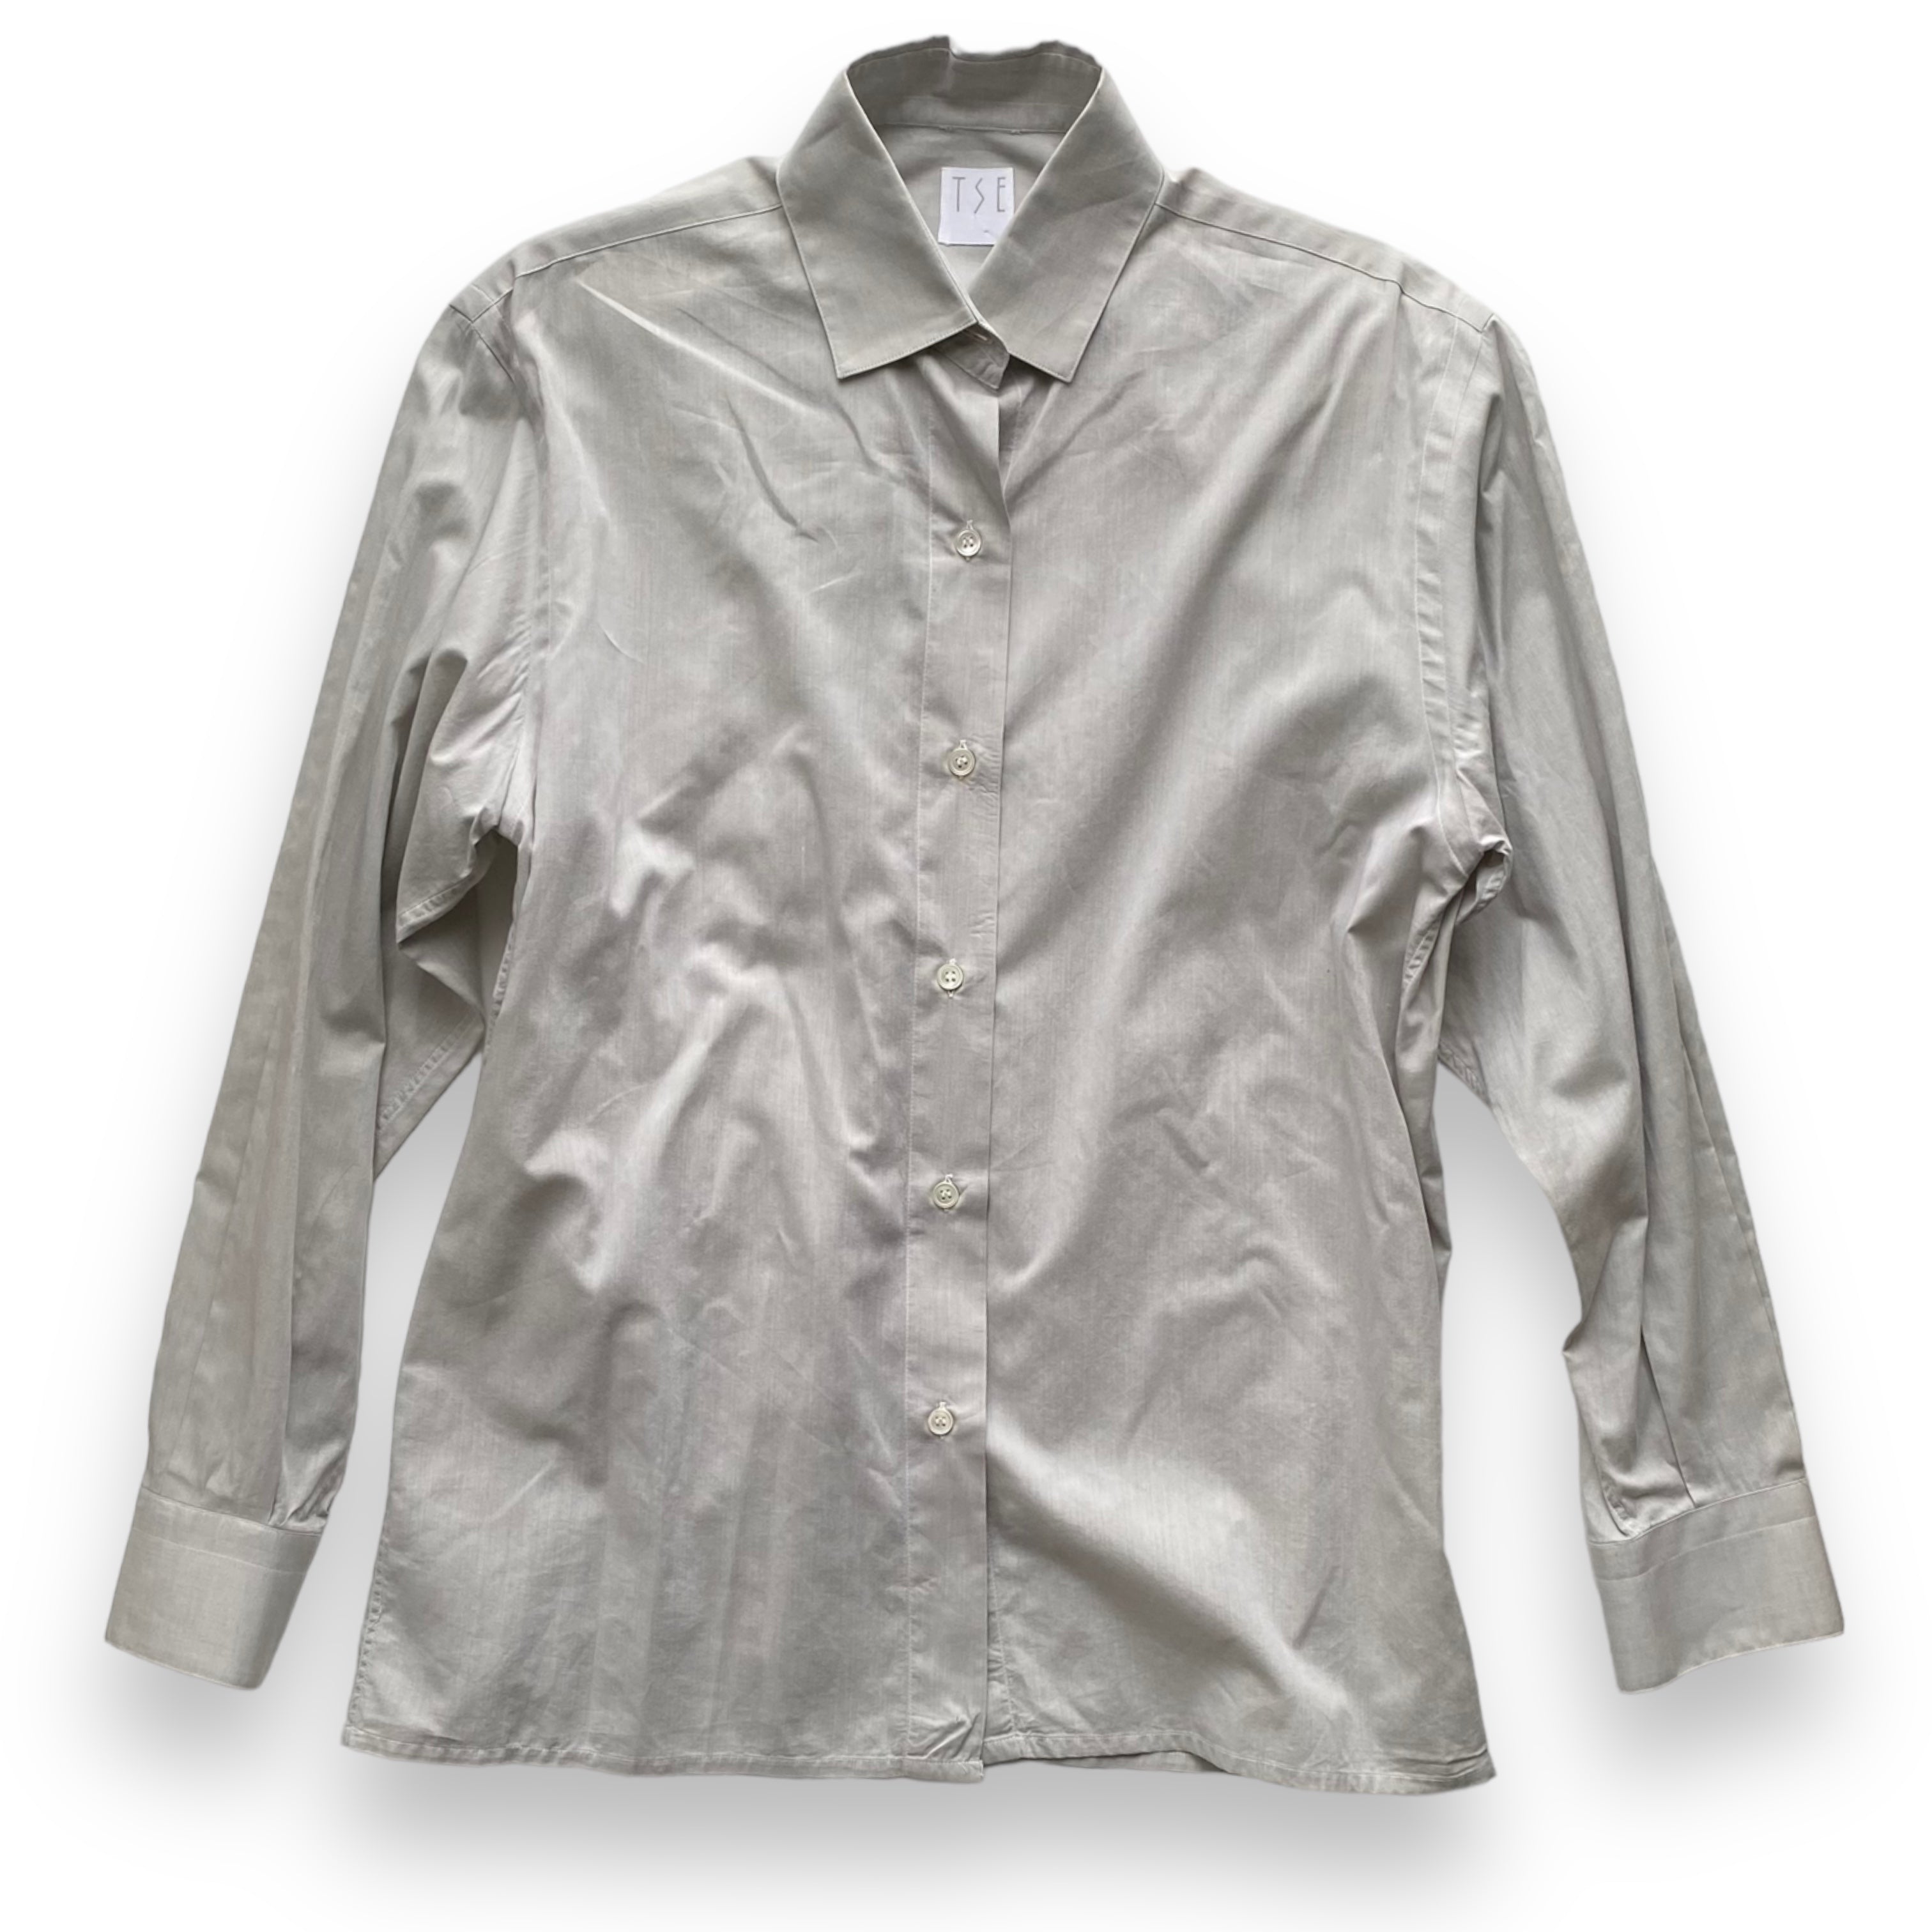 The Petra Shirt &amp; Tie w/ Darling Pewter Stick Pin